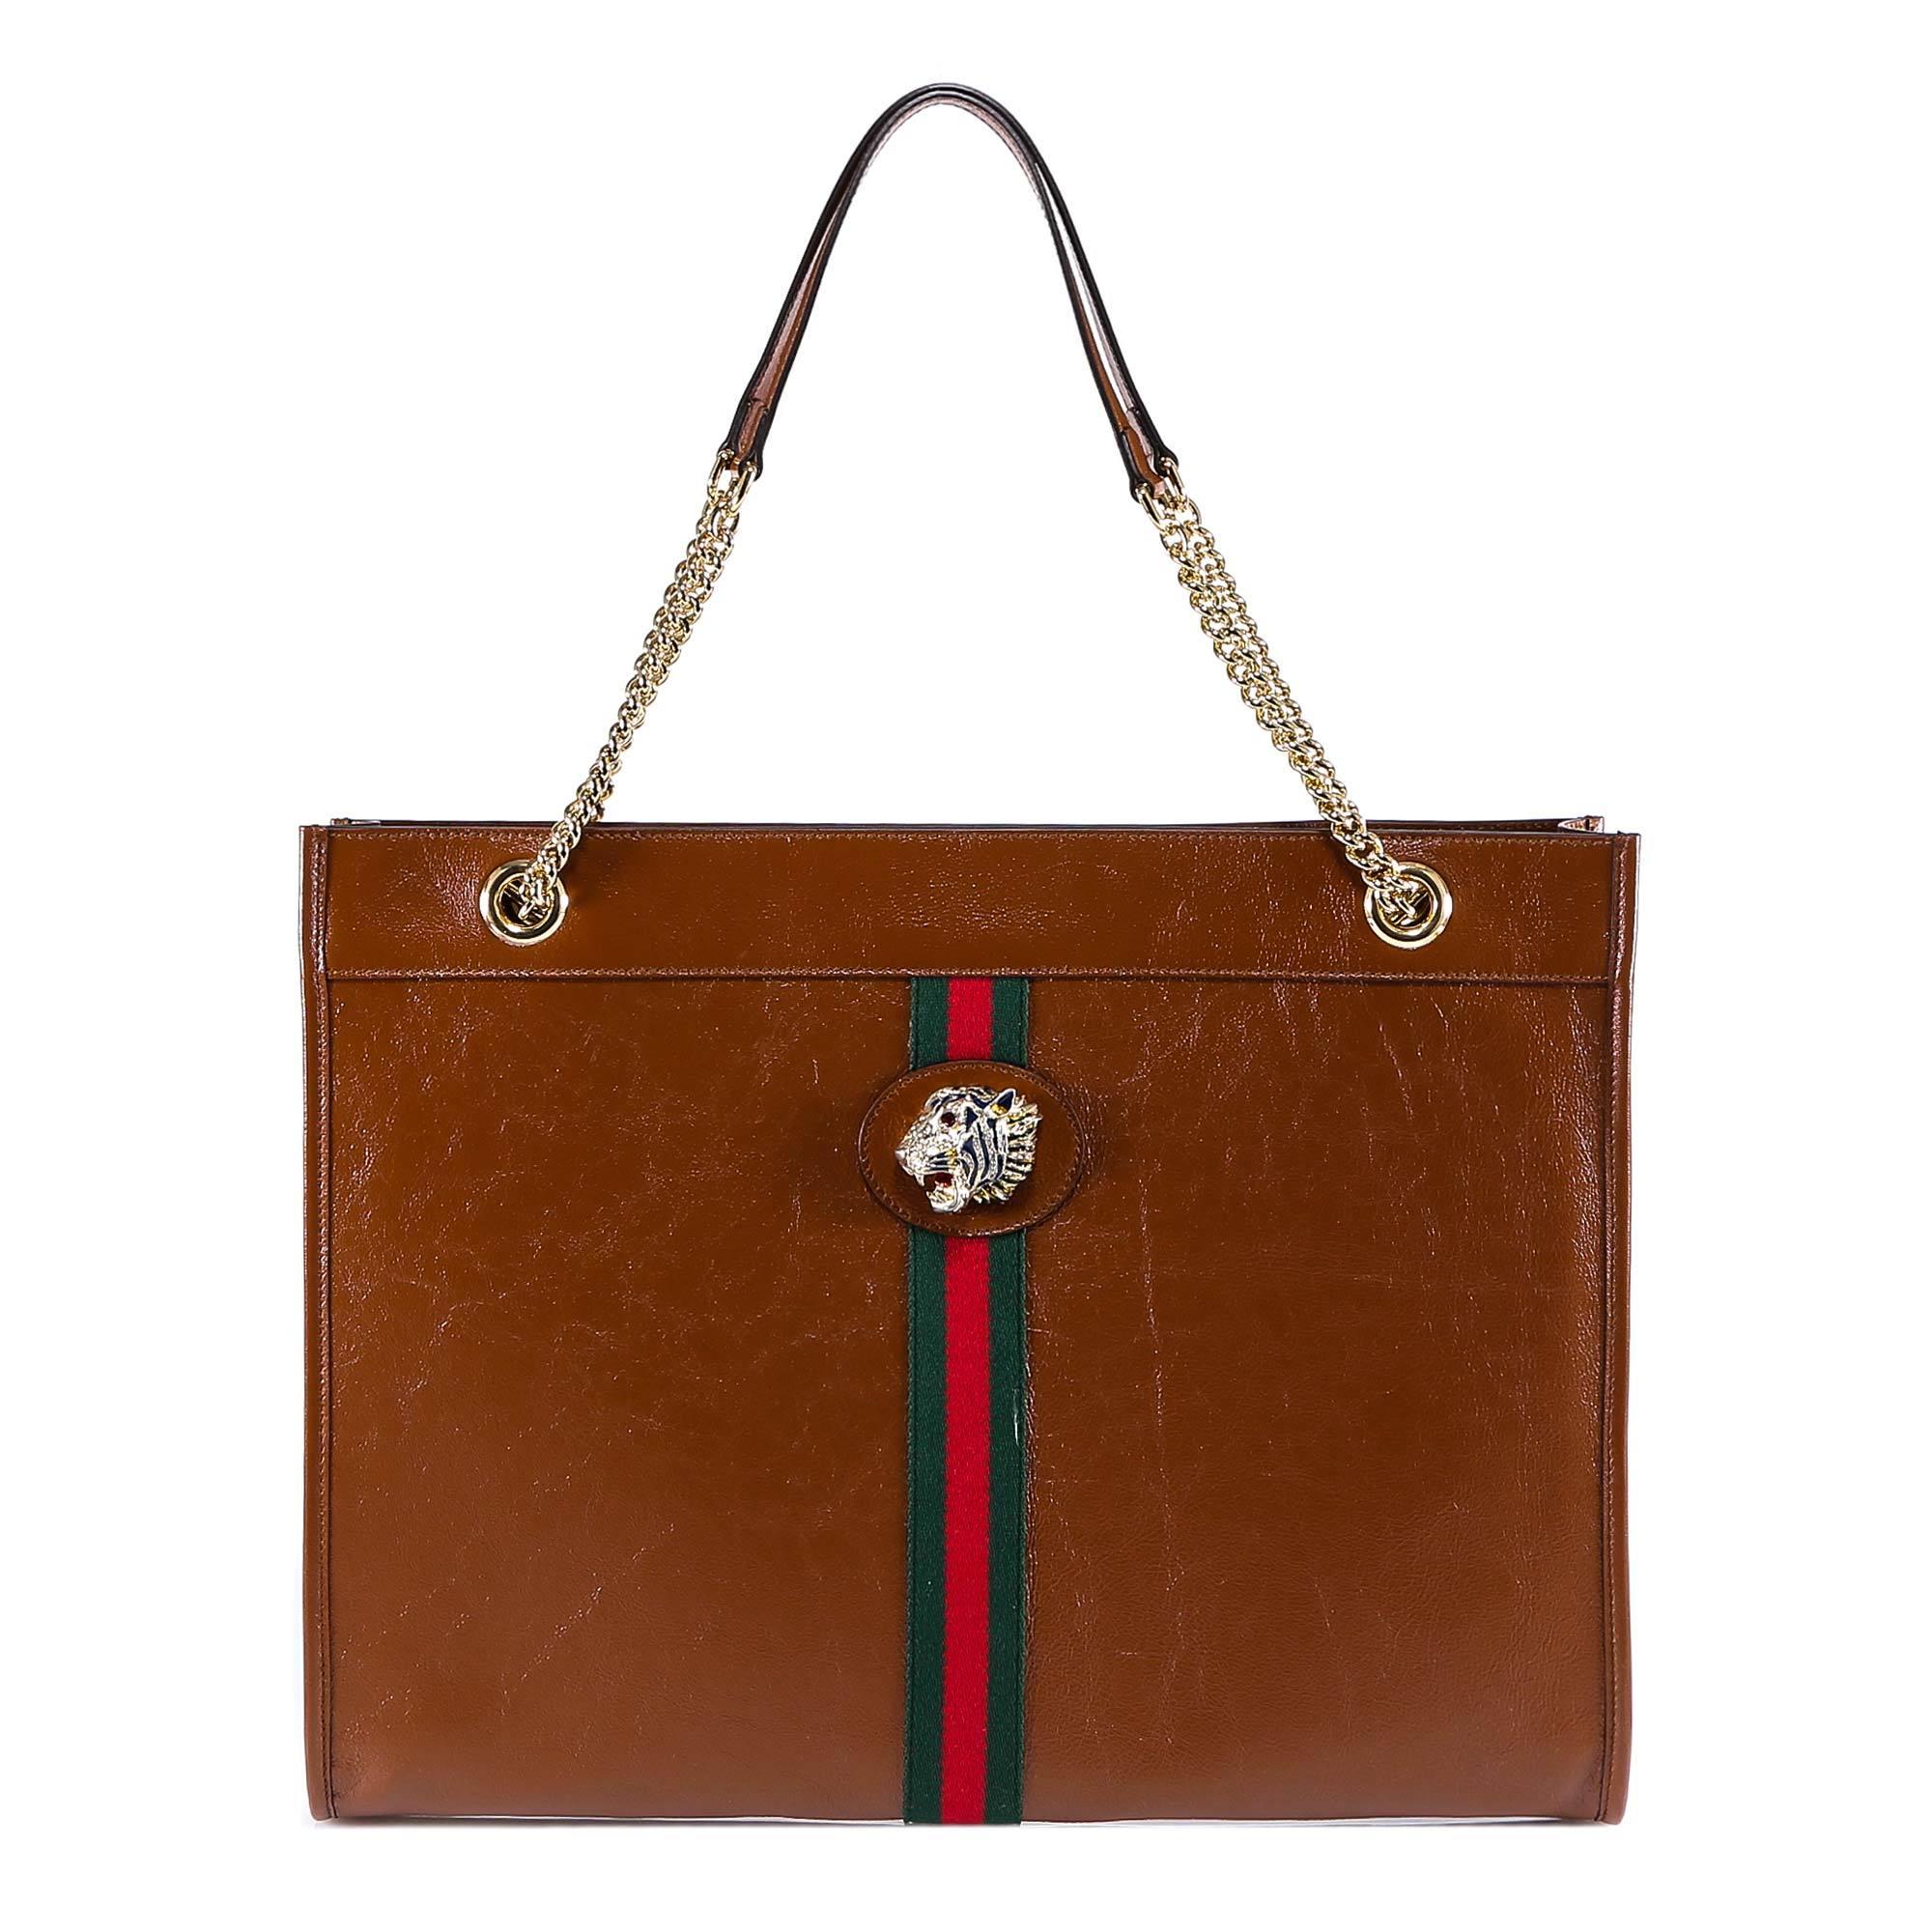 Gucci Large Rajah Leather Tote Bag in Brown - Lyst